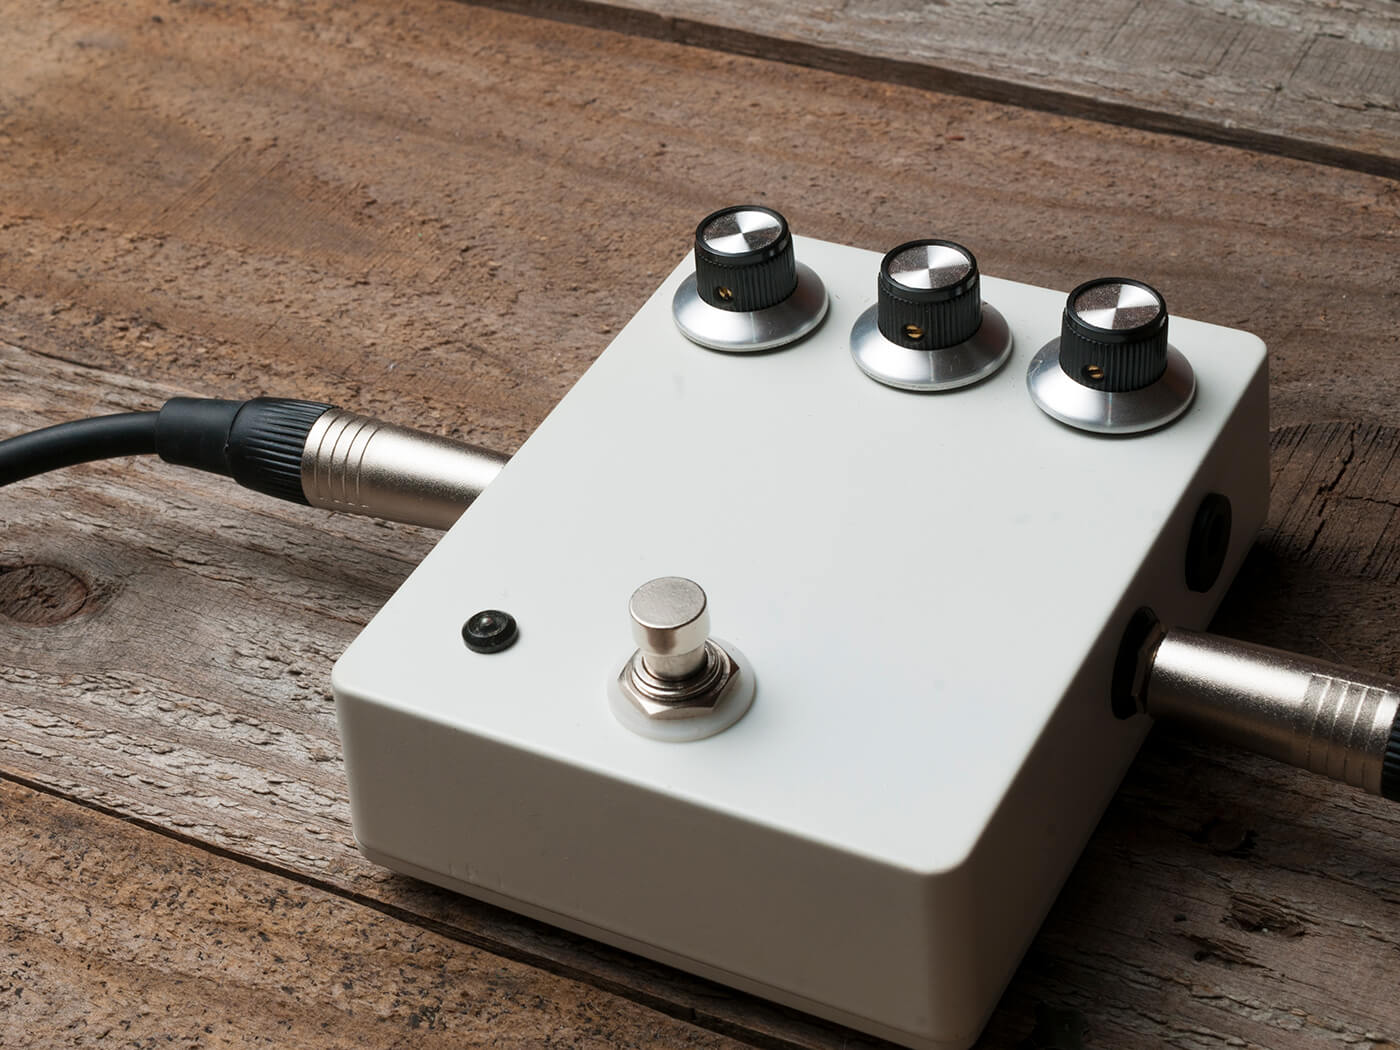 Guitar overdrive pedal